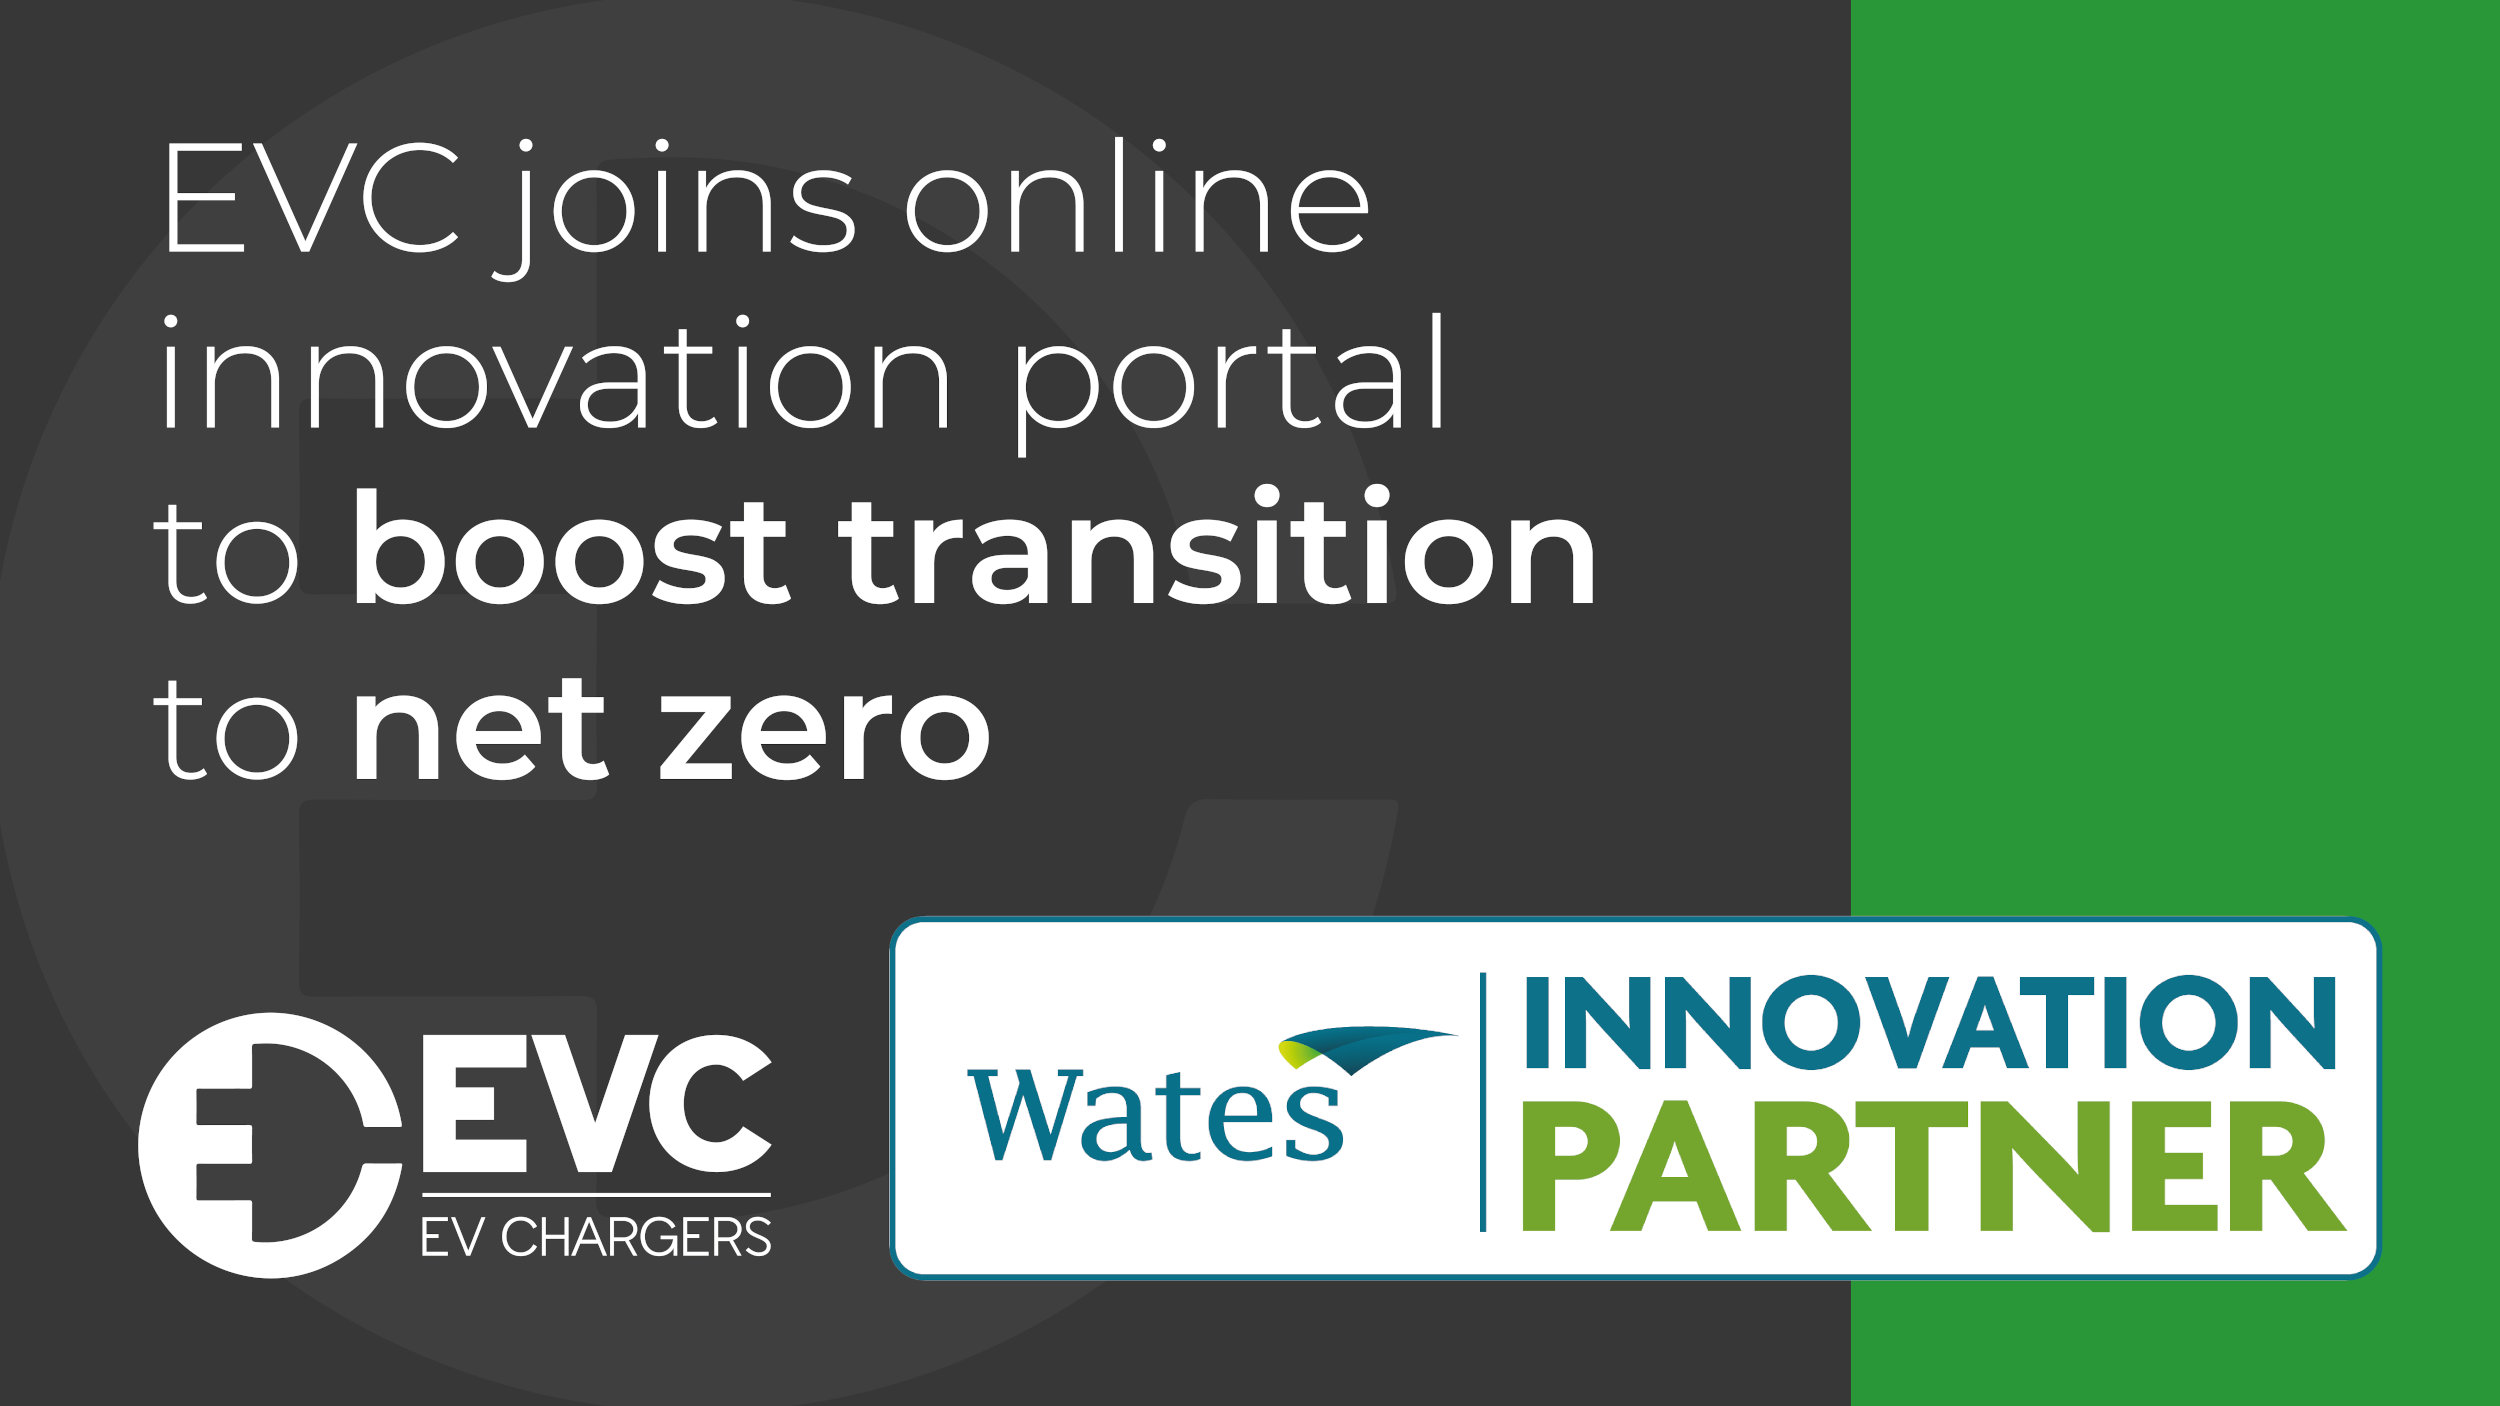 EVC joins online innovation portal to boost transition to net zero